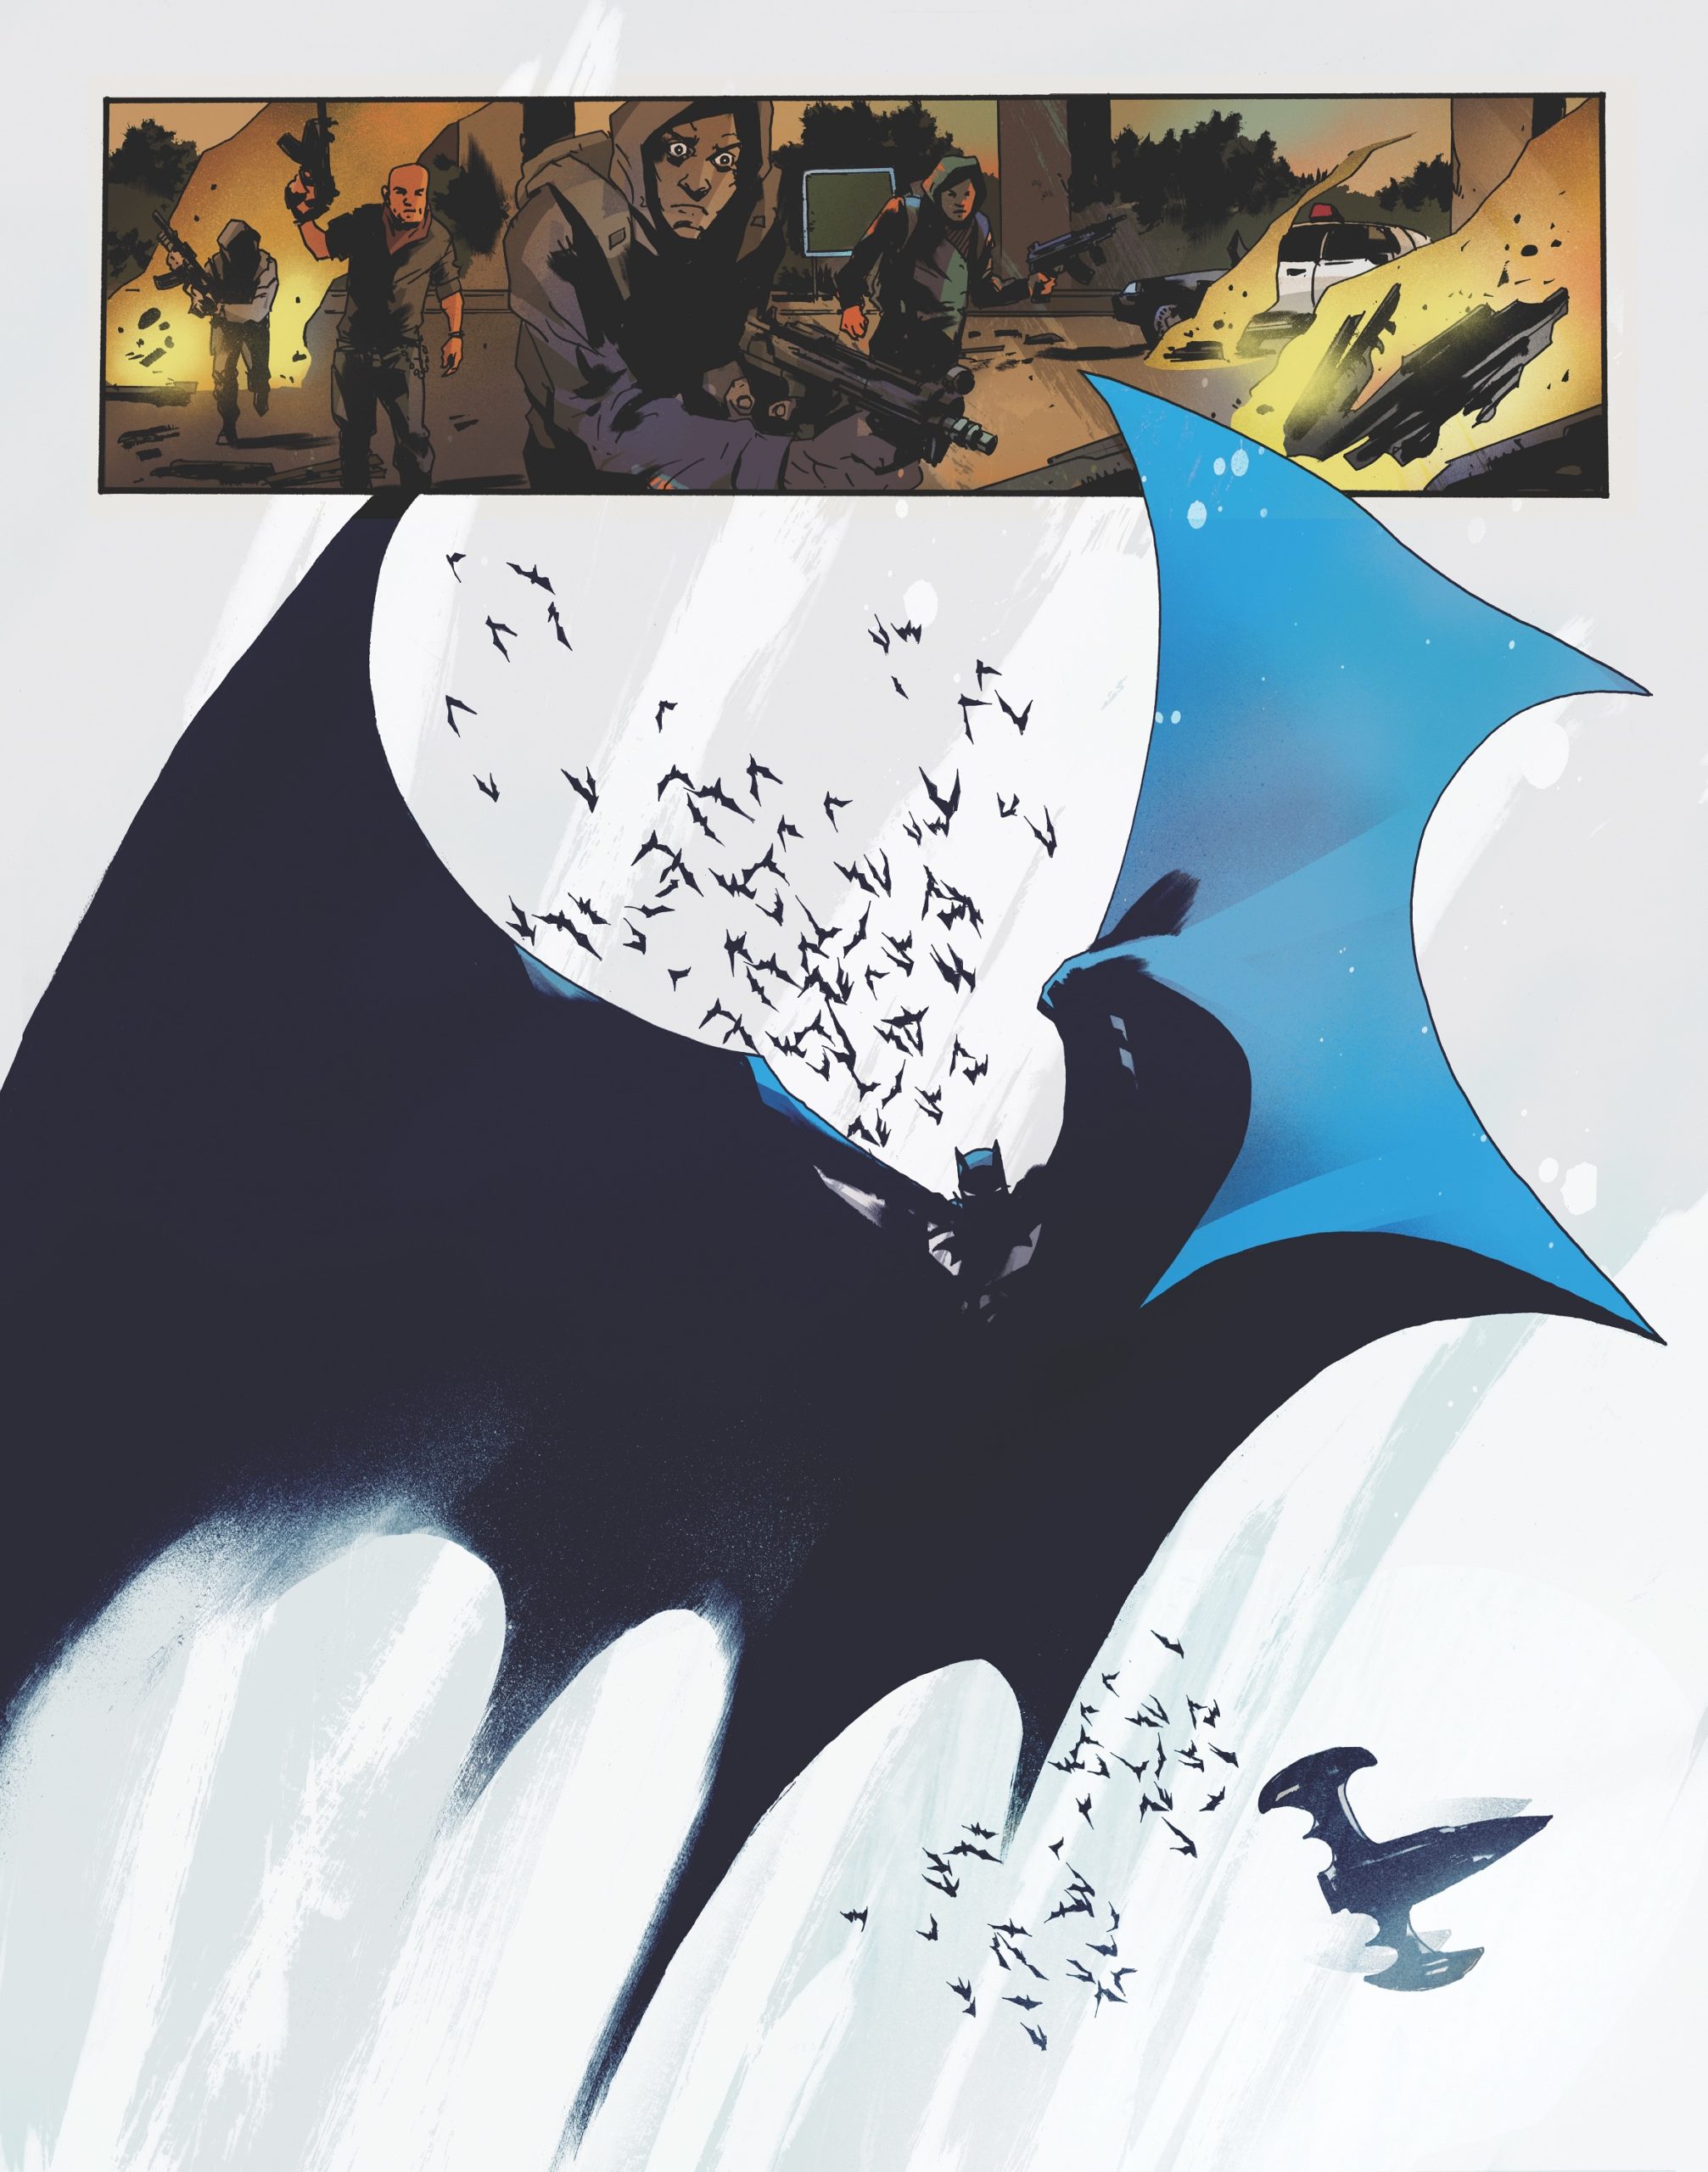 Batman: One Dark Knight By Iconic Writer and Artist Jock Is Coming To DC  Black Label - Dark Knight News